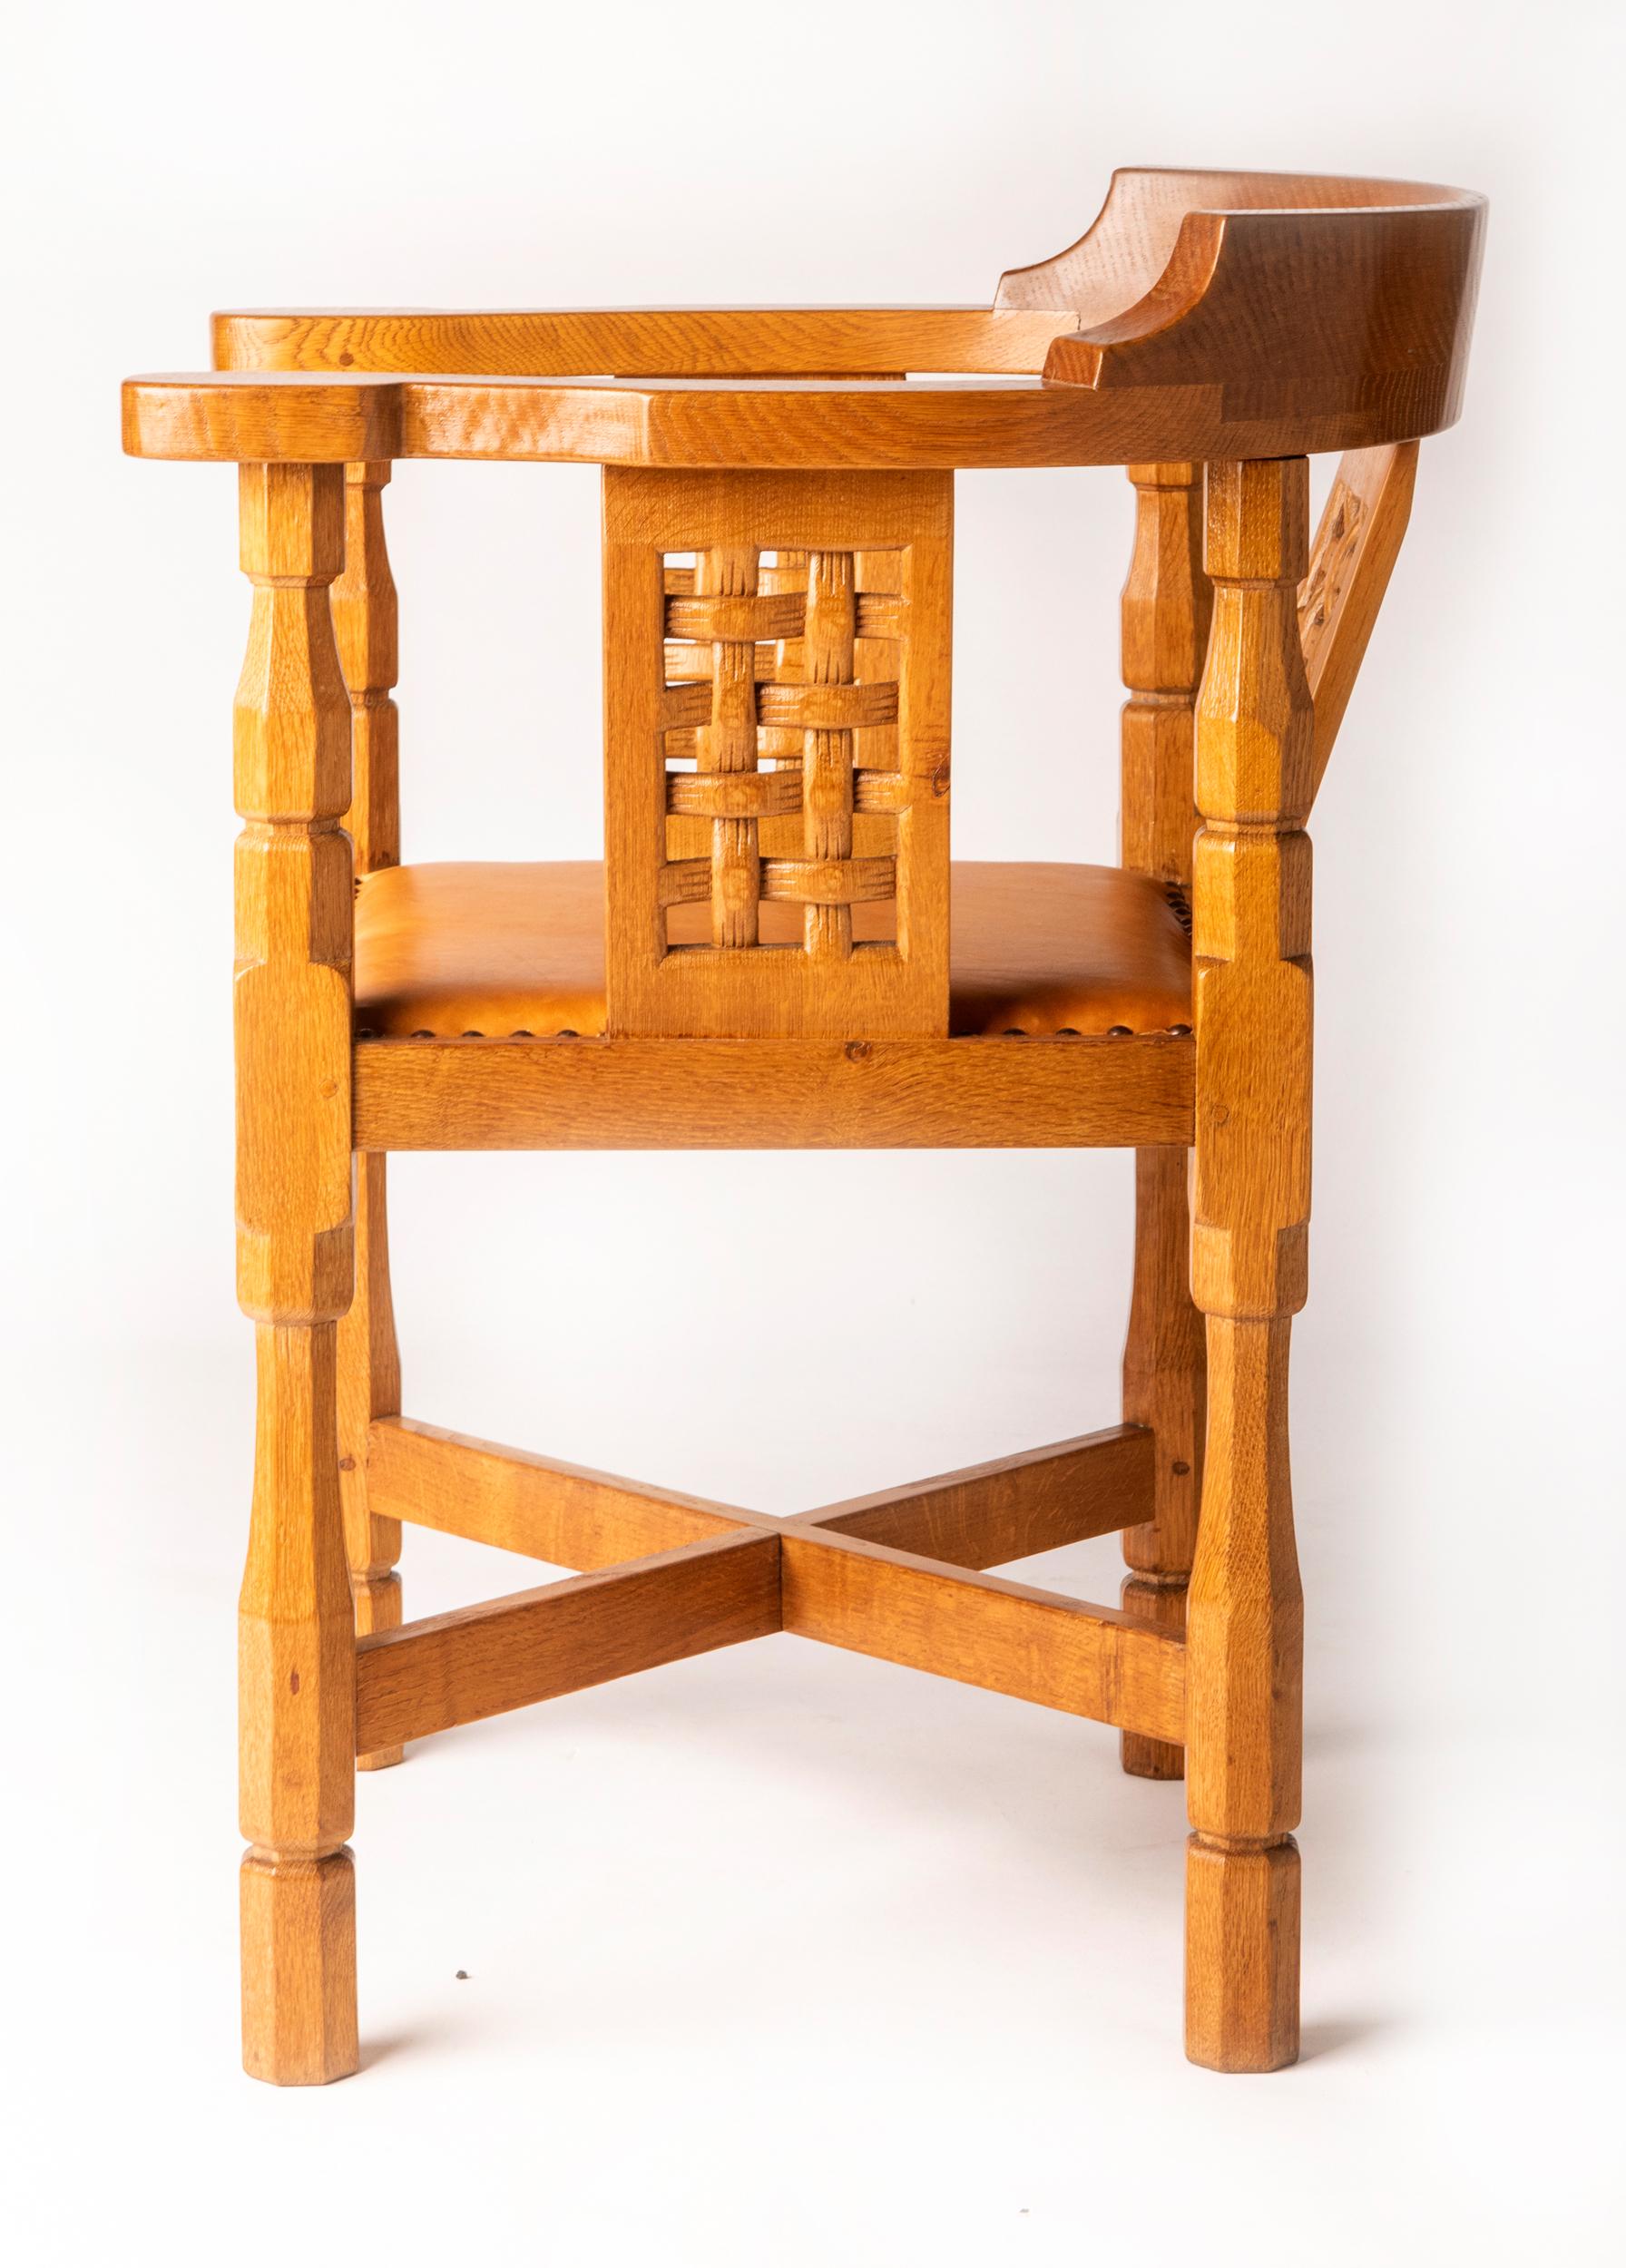 Oak Monk’s chair by Robert “Mouseman” Thompson
The curved back splat trellis woven pattern.
Leather seat above octagonal carved legs
Carved mouse signature.
England, circa 1950
Measures: 80 cm high x 62 cm wide x 45 cm deep.
  